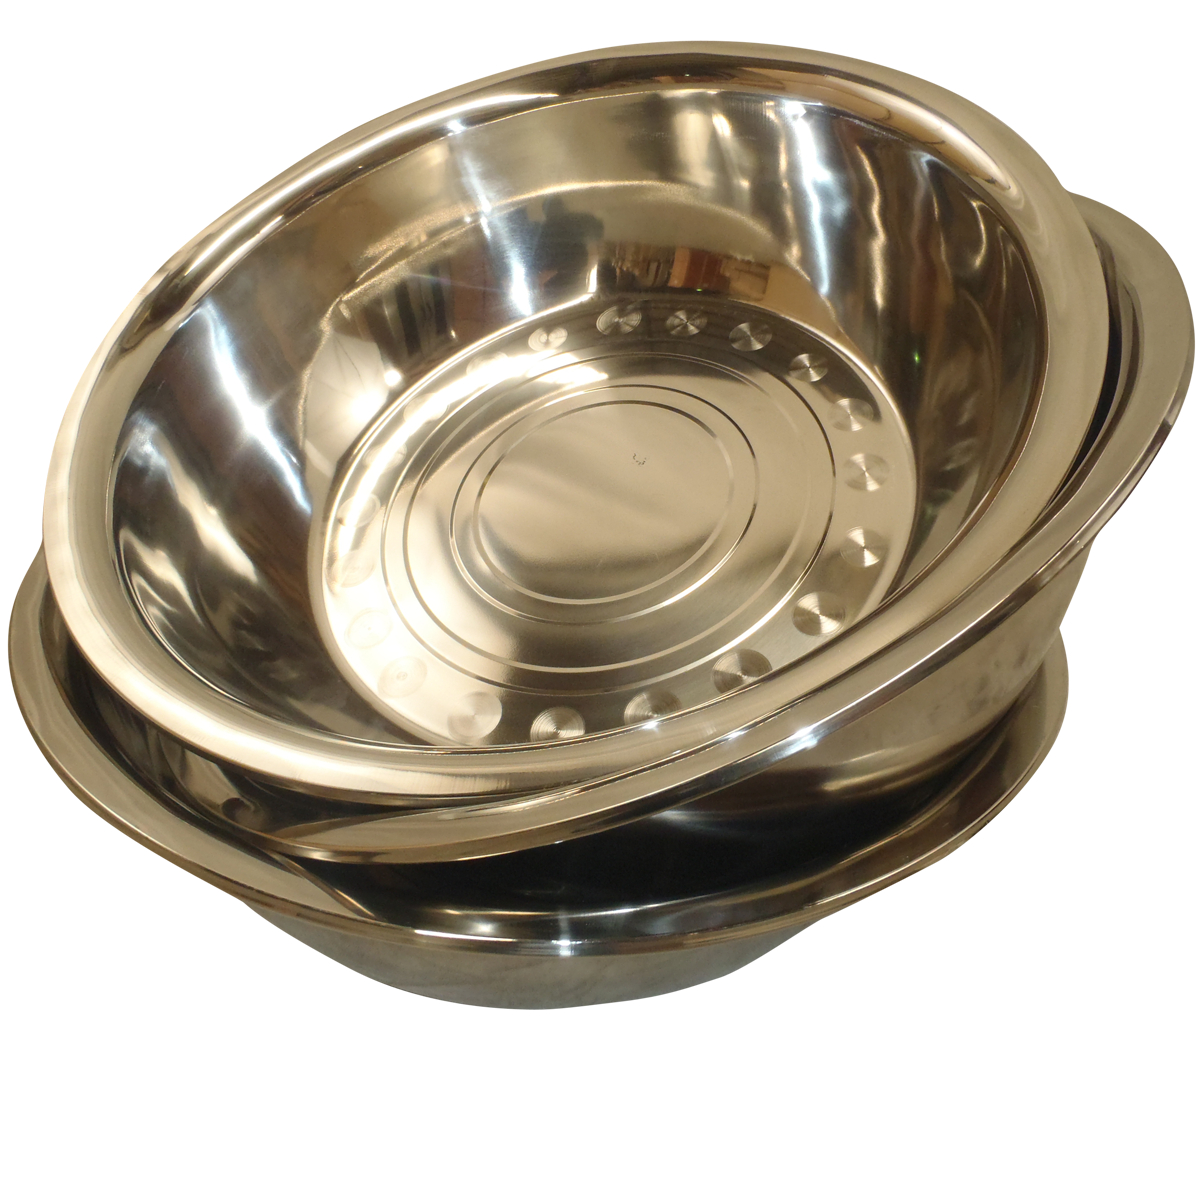 chefs stainless steel mixing bowls